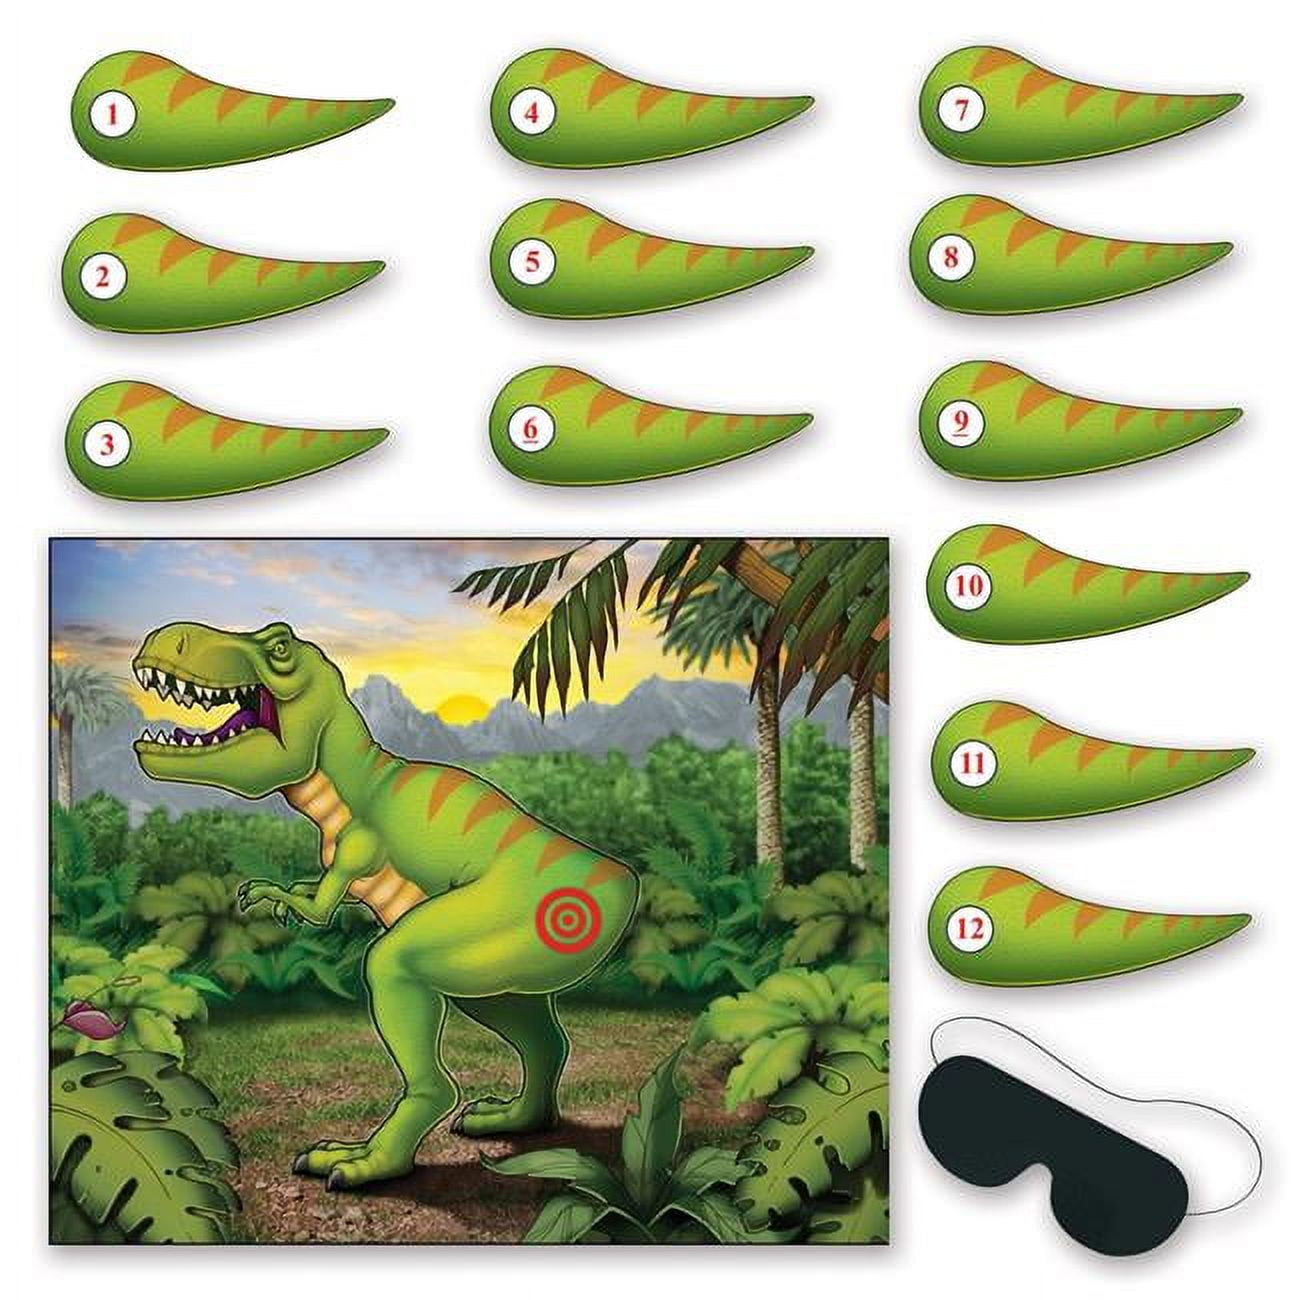 JOARHONAL Pin The Tail on The Dinosaur Game - Dinosaur Birthday Party Games  for Kids Boys Watercolor Dinosaur Party Supplies with 24 PCs Tail Stickers